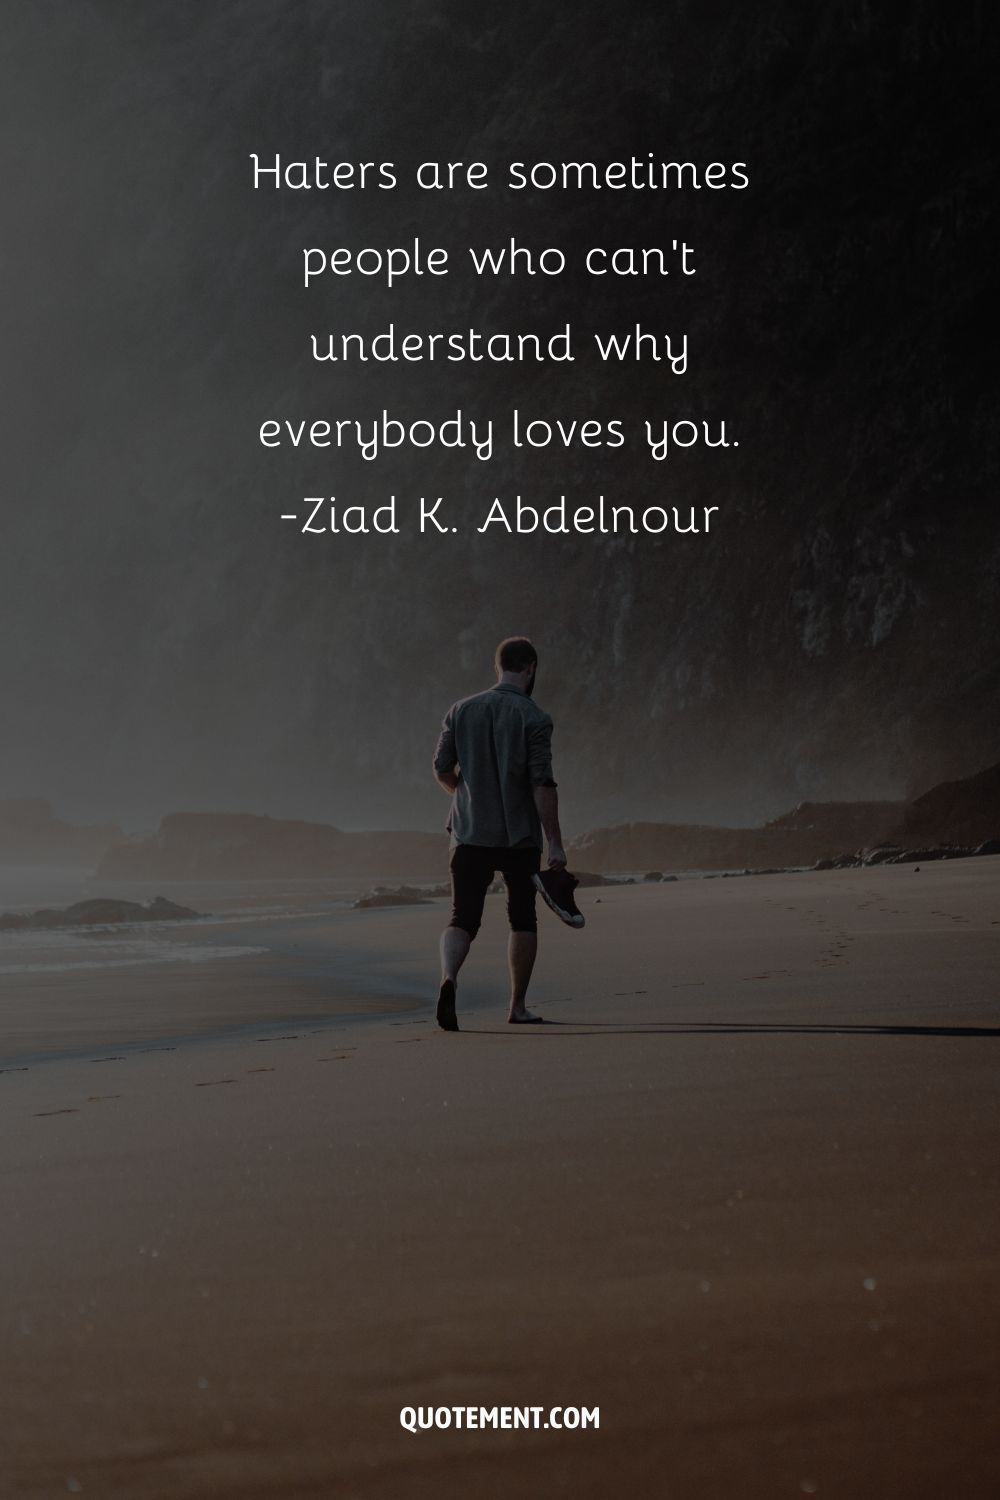 Haters are sometimes people who can’t understand why everybody loves you